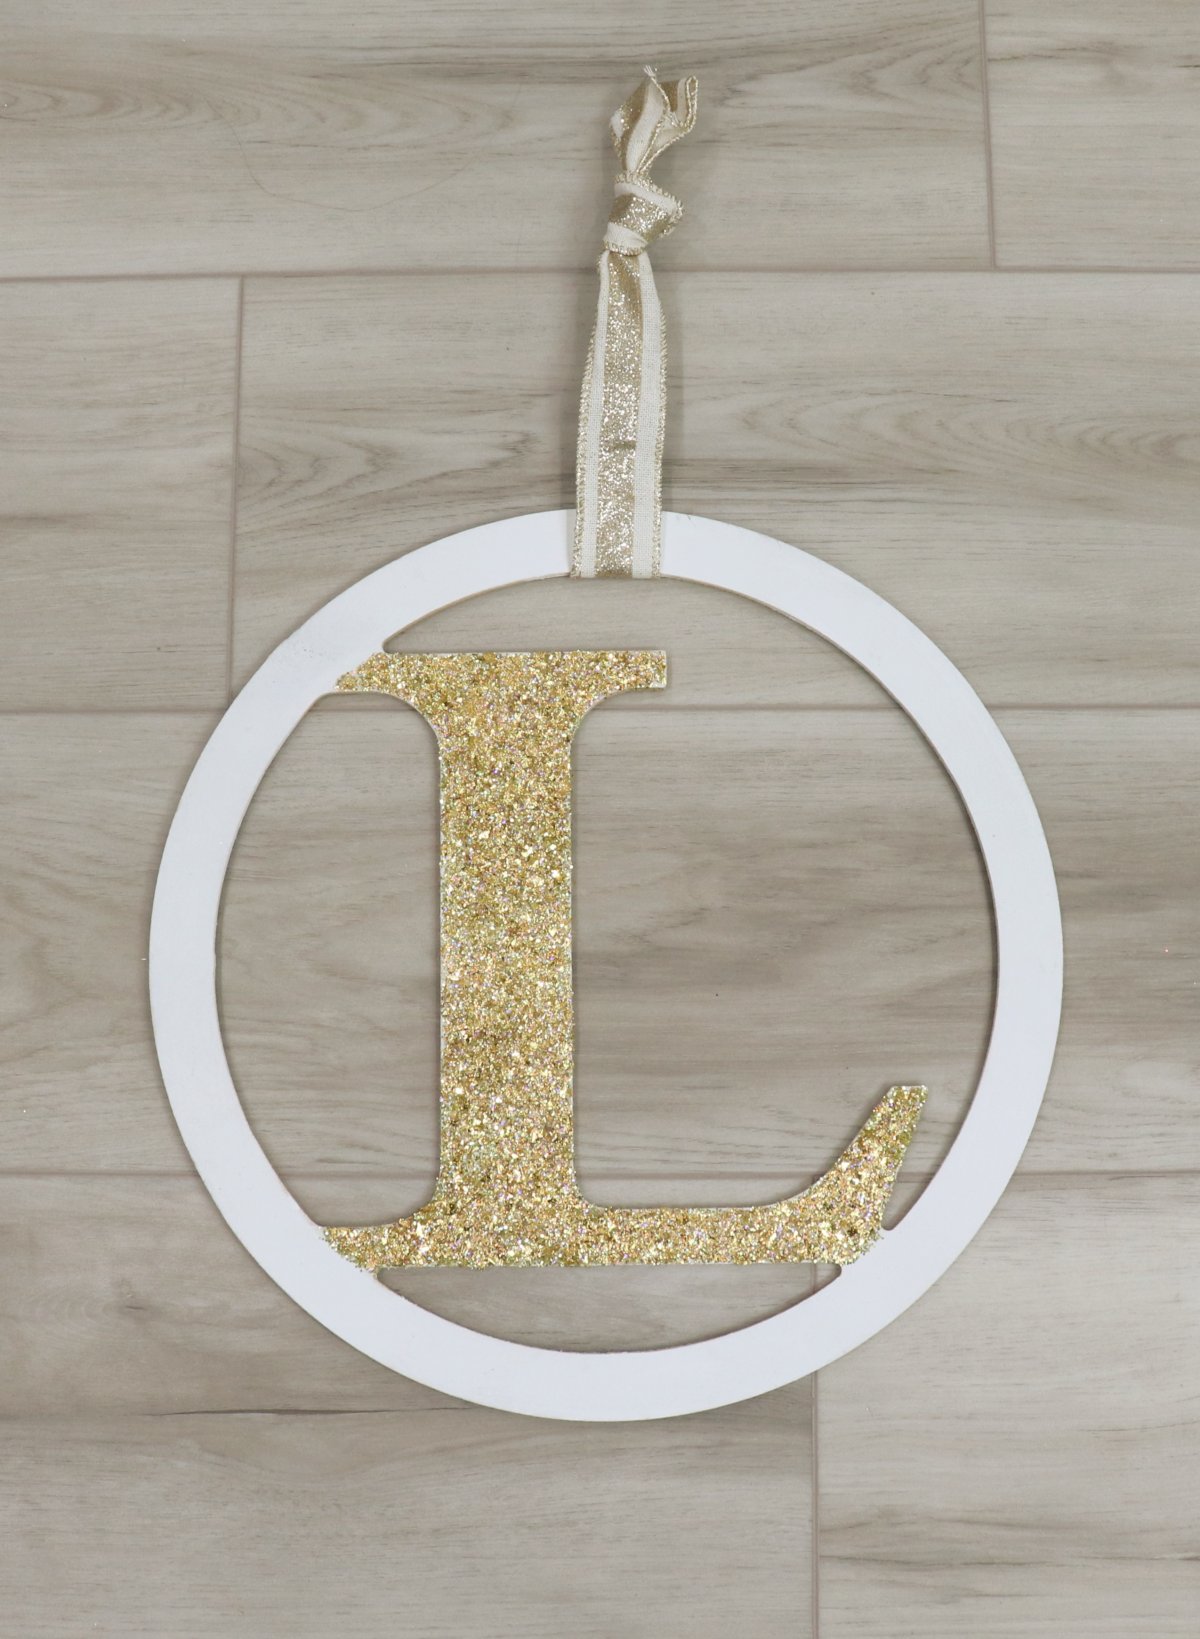 Image contains a large wooden monogram painted white and gold.